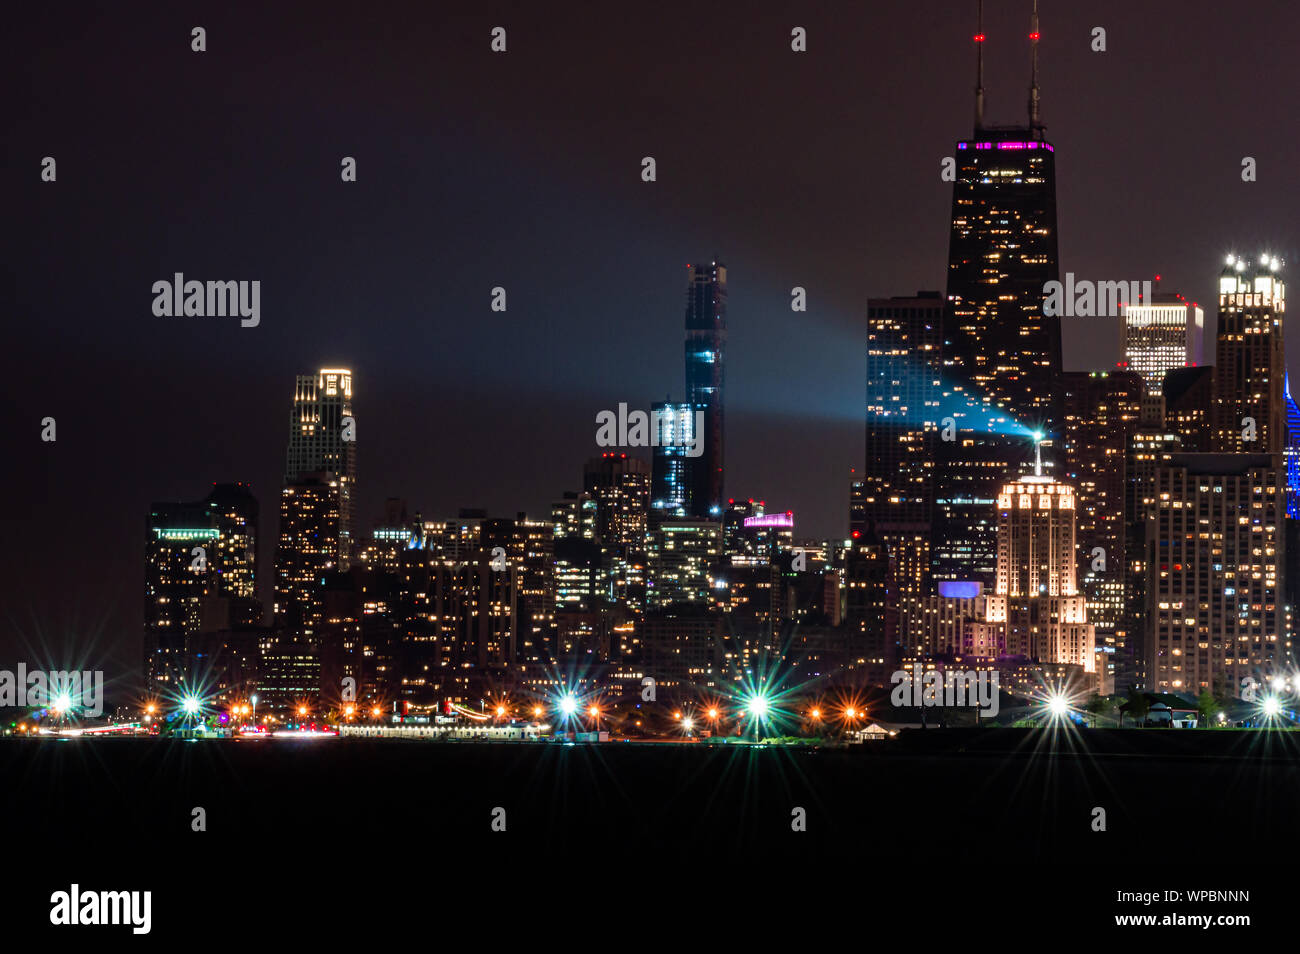 Downtown lights up at night. Chicago skyline from the north lakefront at Diversey Harbor. Stock Photo